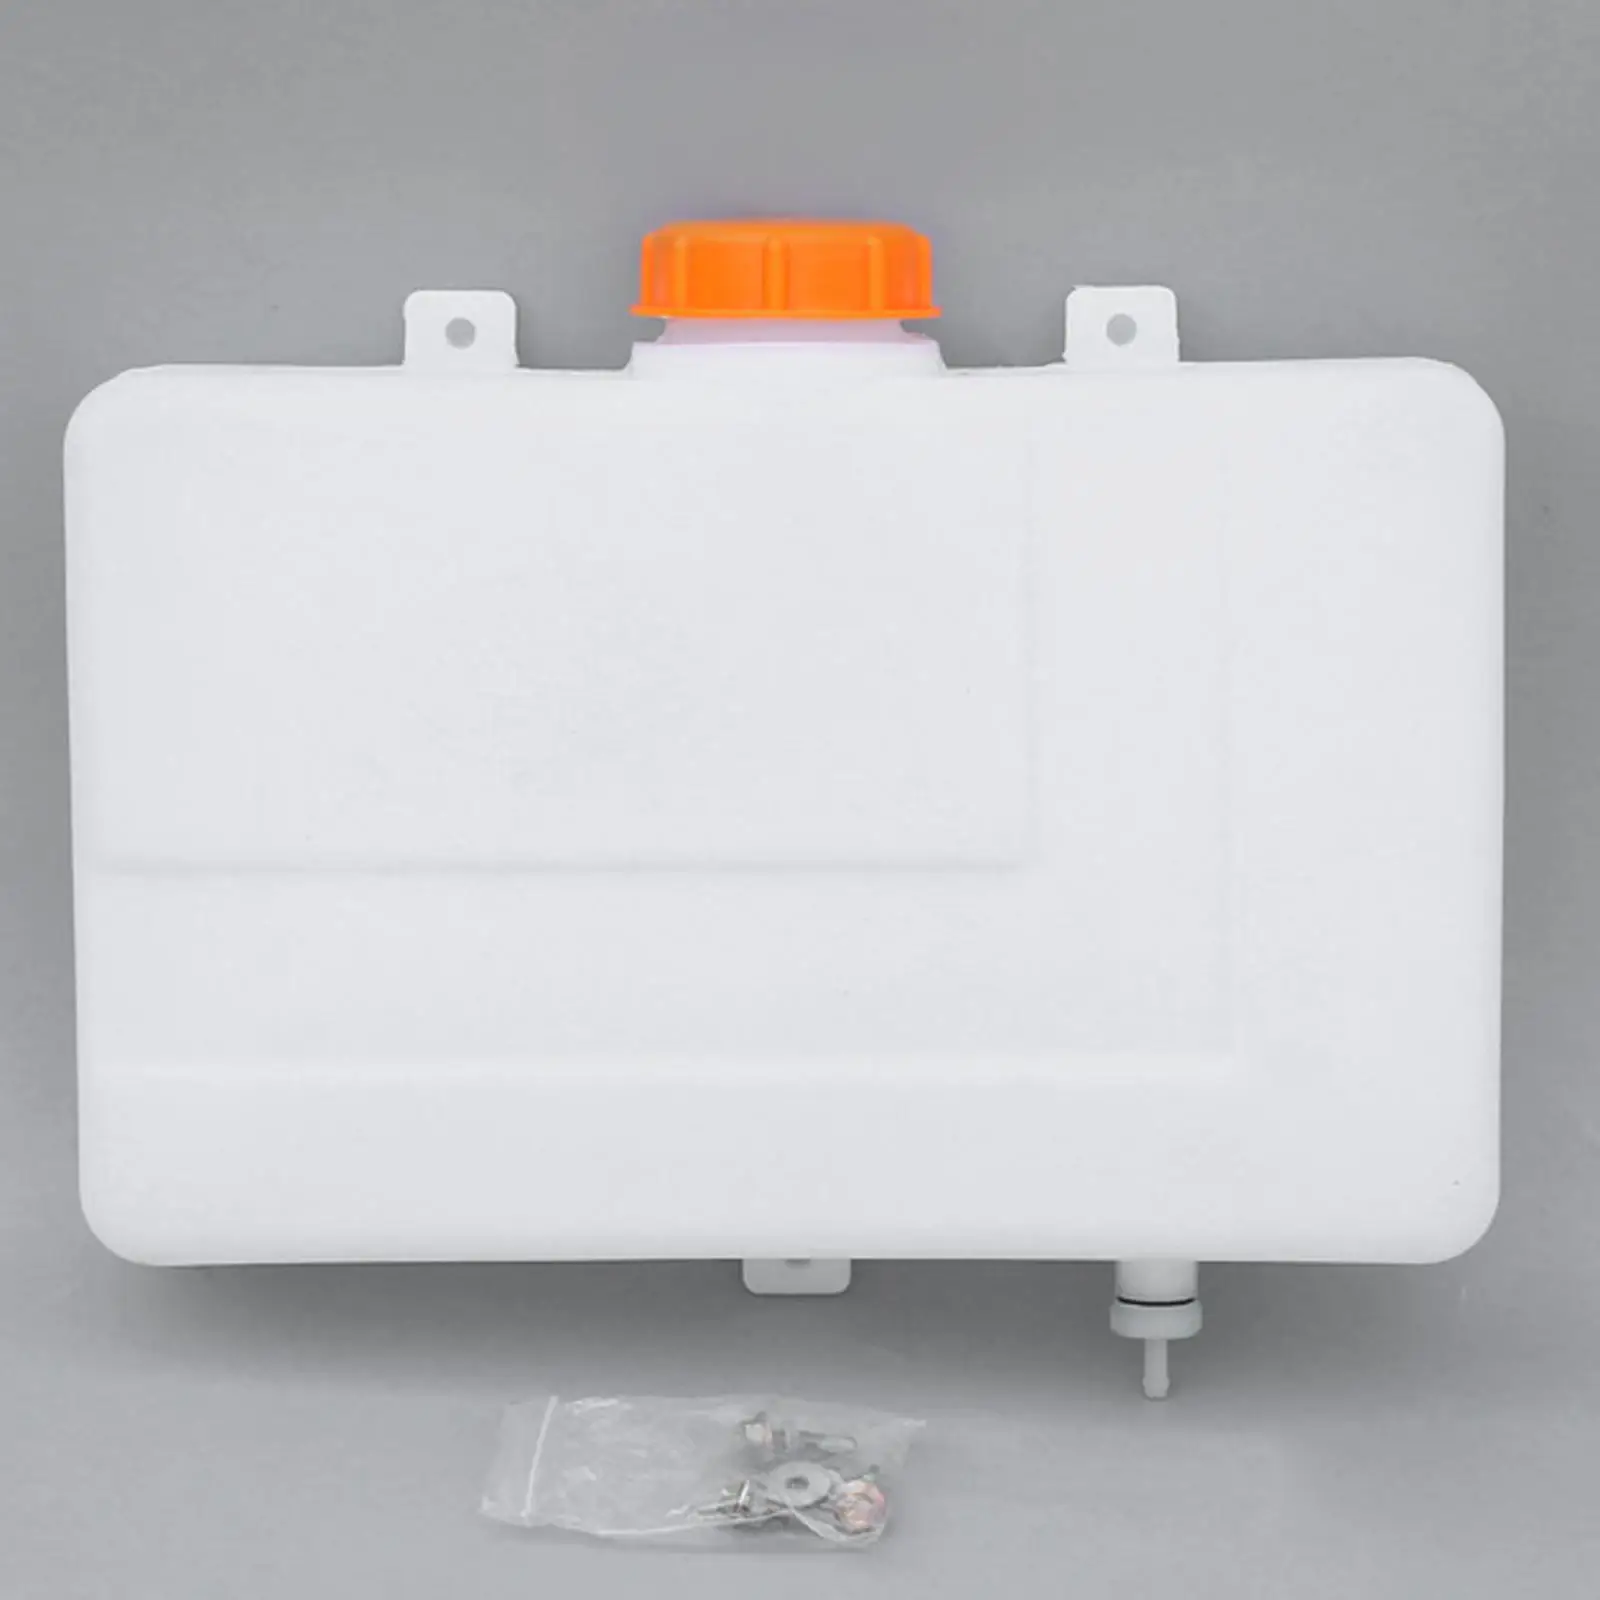 Gasoline Fuel Oil Tank Plastic 7L Gas Can for Motorcycle Carry Other Liquids